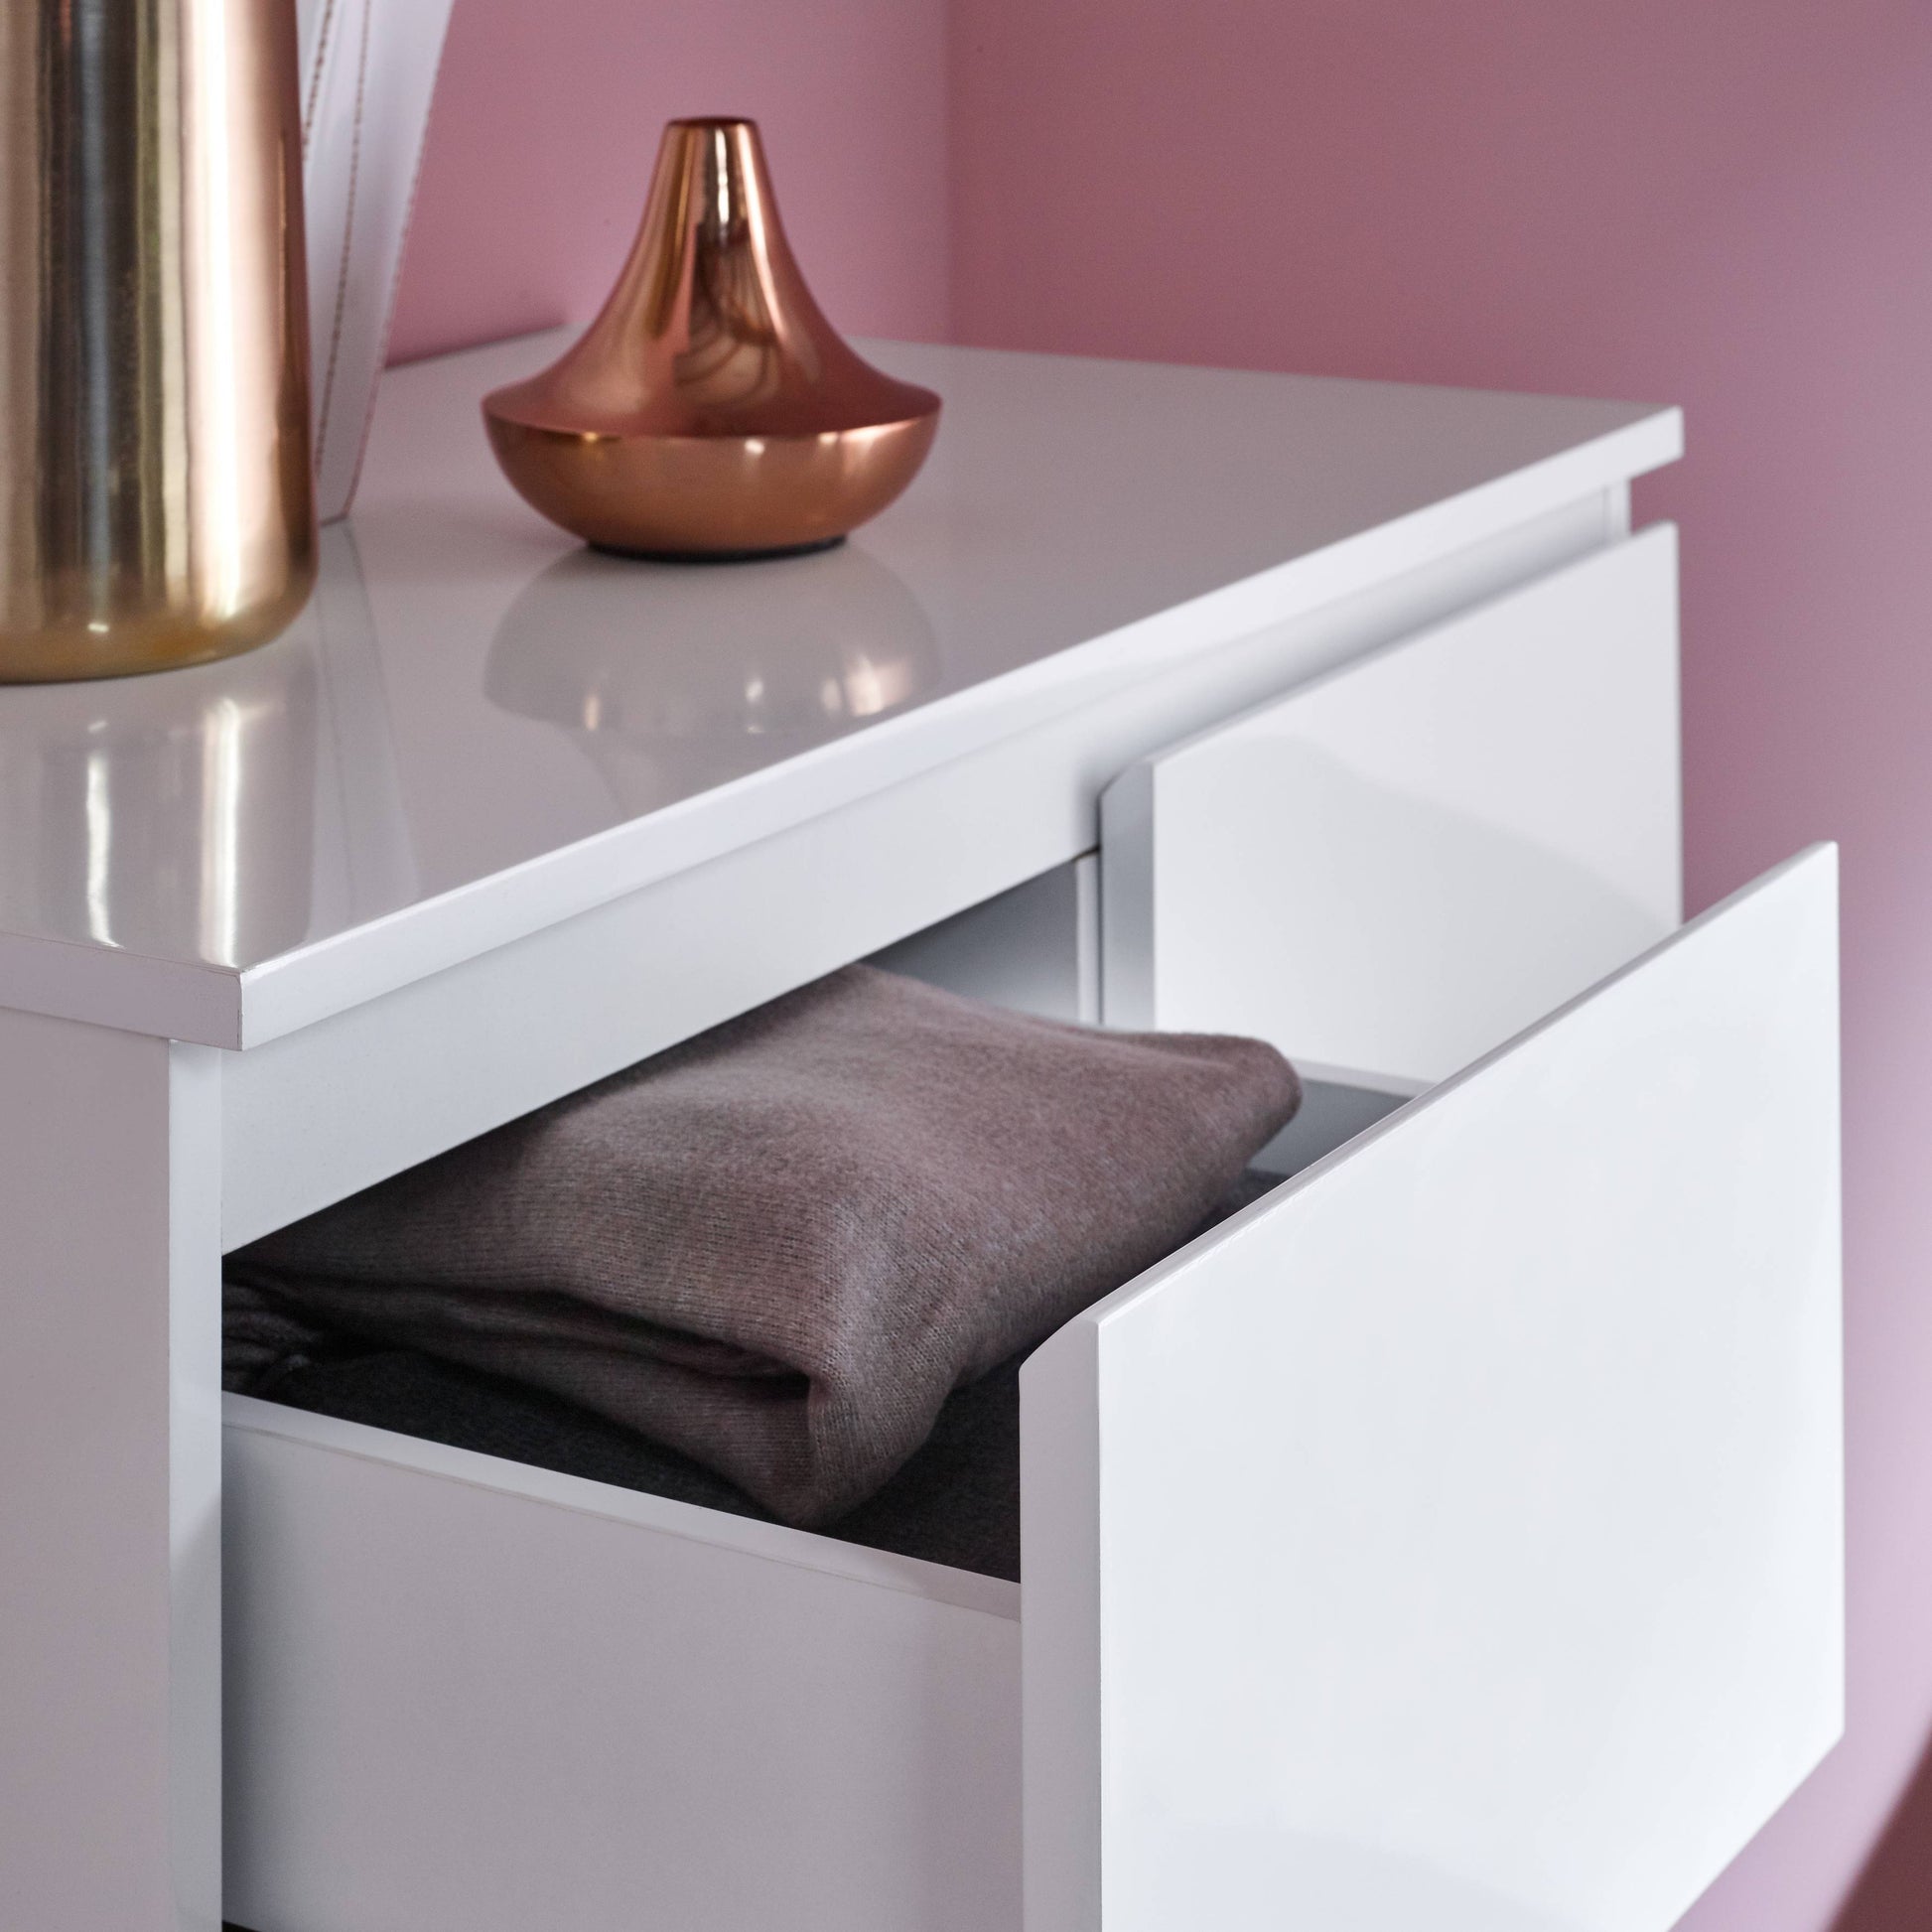 Clemmie high gloss 2 over 3 chest of drawers - white - Laura James